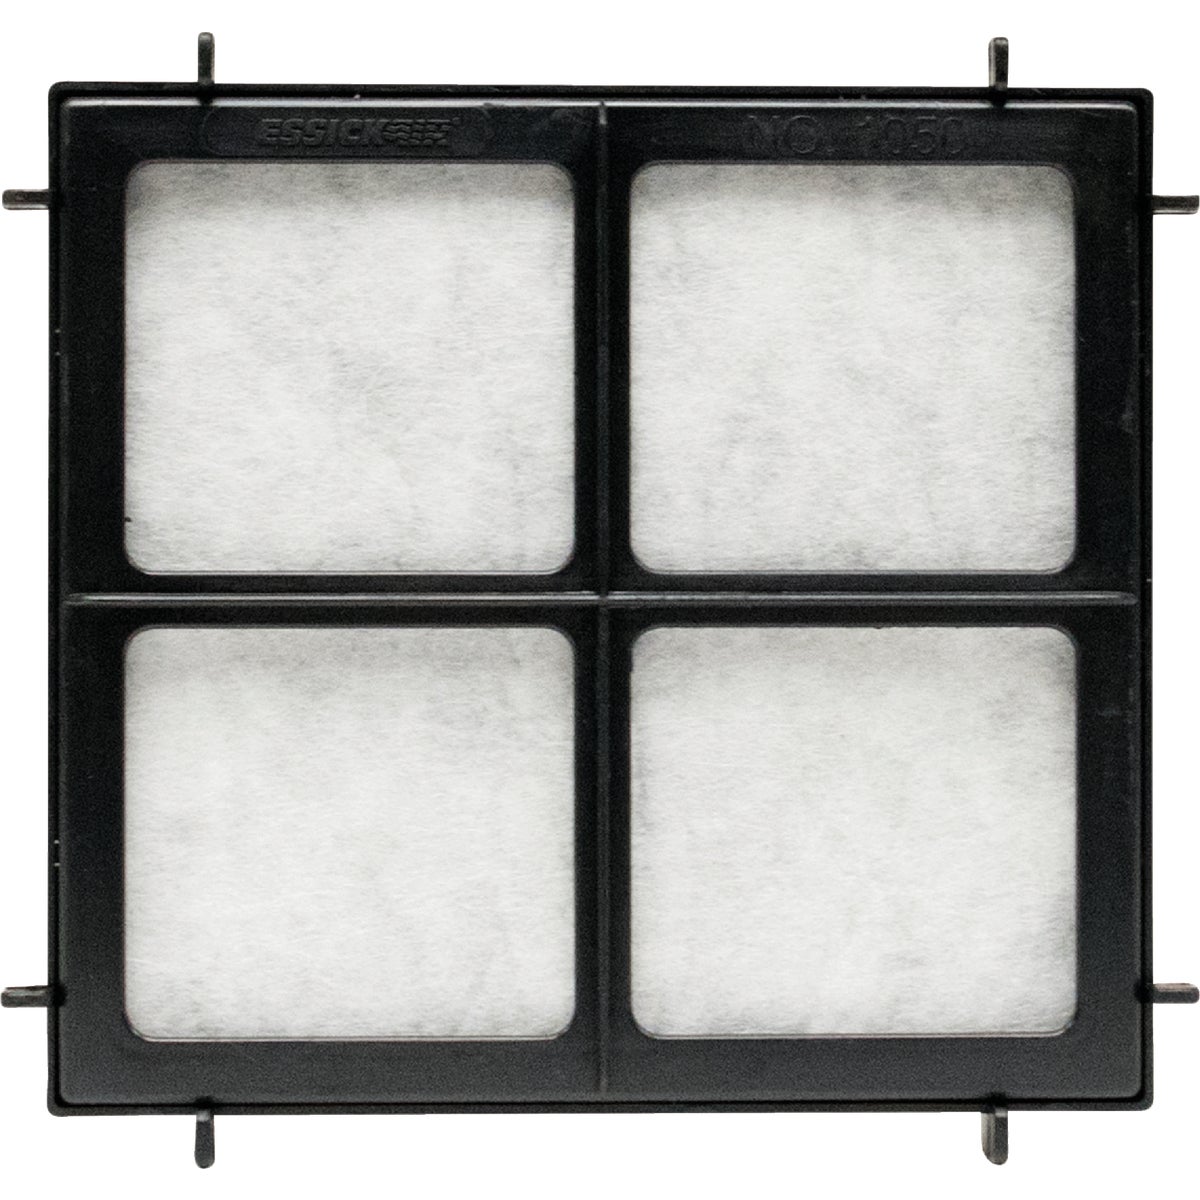 Item 512087, 2-stage filter traps airborne pollutants and odors.